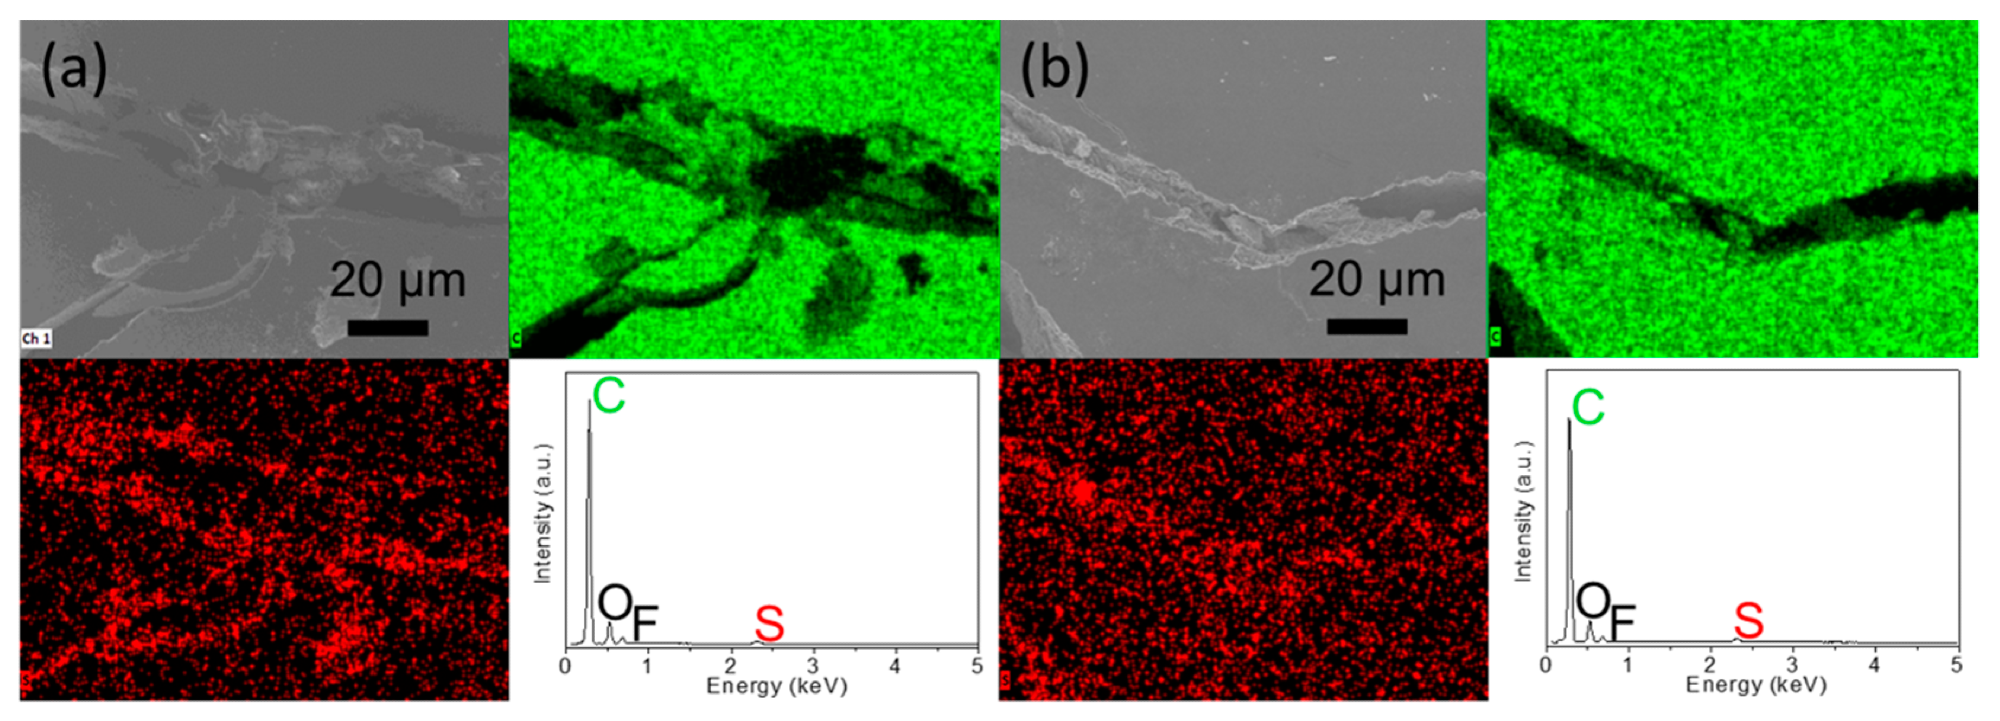 Electrochemical analysis: microstructural inspection and elemental mapping results of the inserted carbon paper for the polysulfide diffusion analysis: (a) the side facing cathode and (b) the side facing anode.